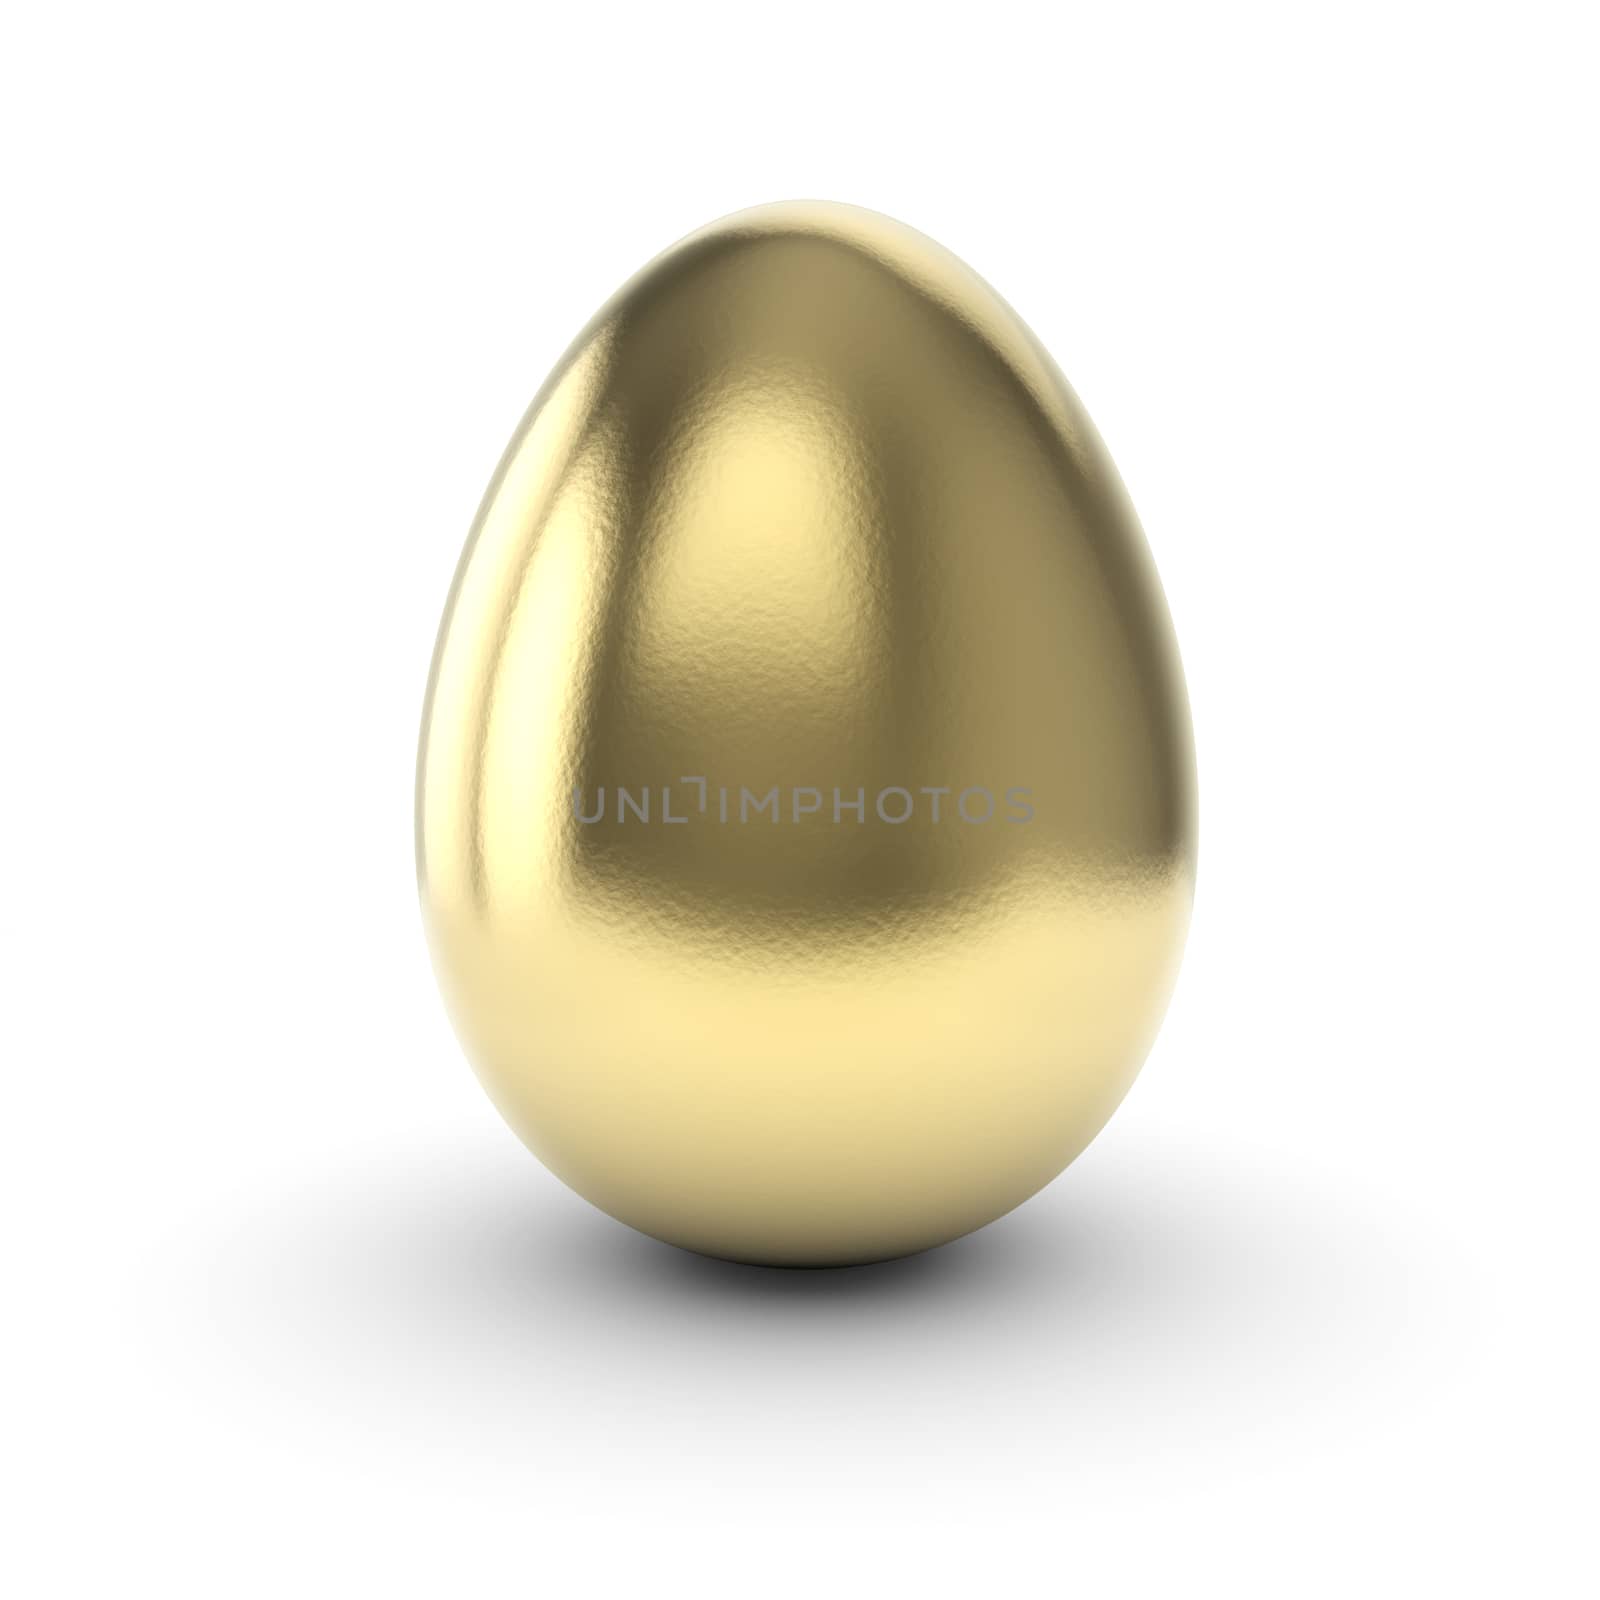 Golden Egg isolated on white bg with clipping path